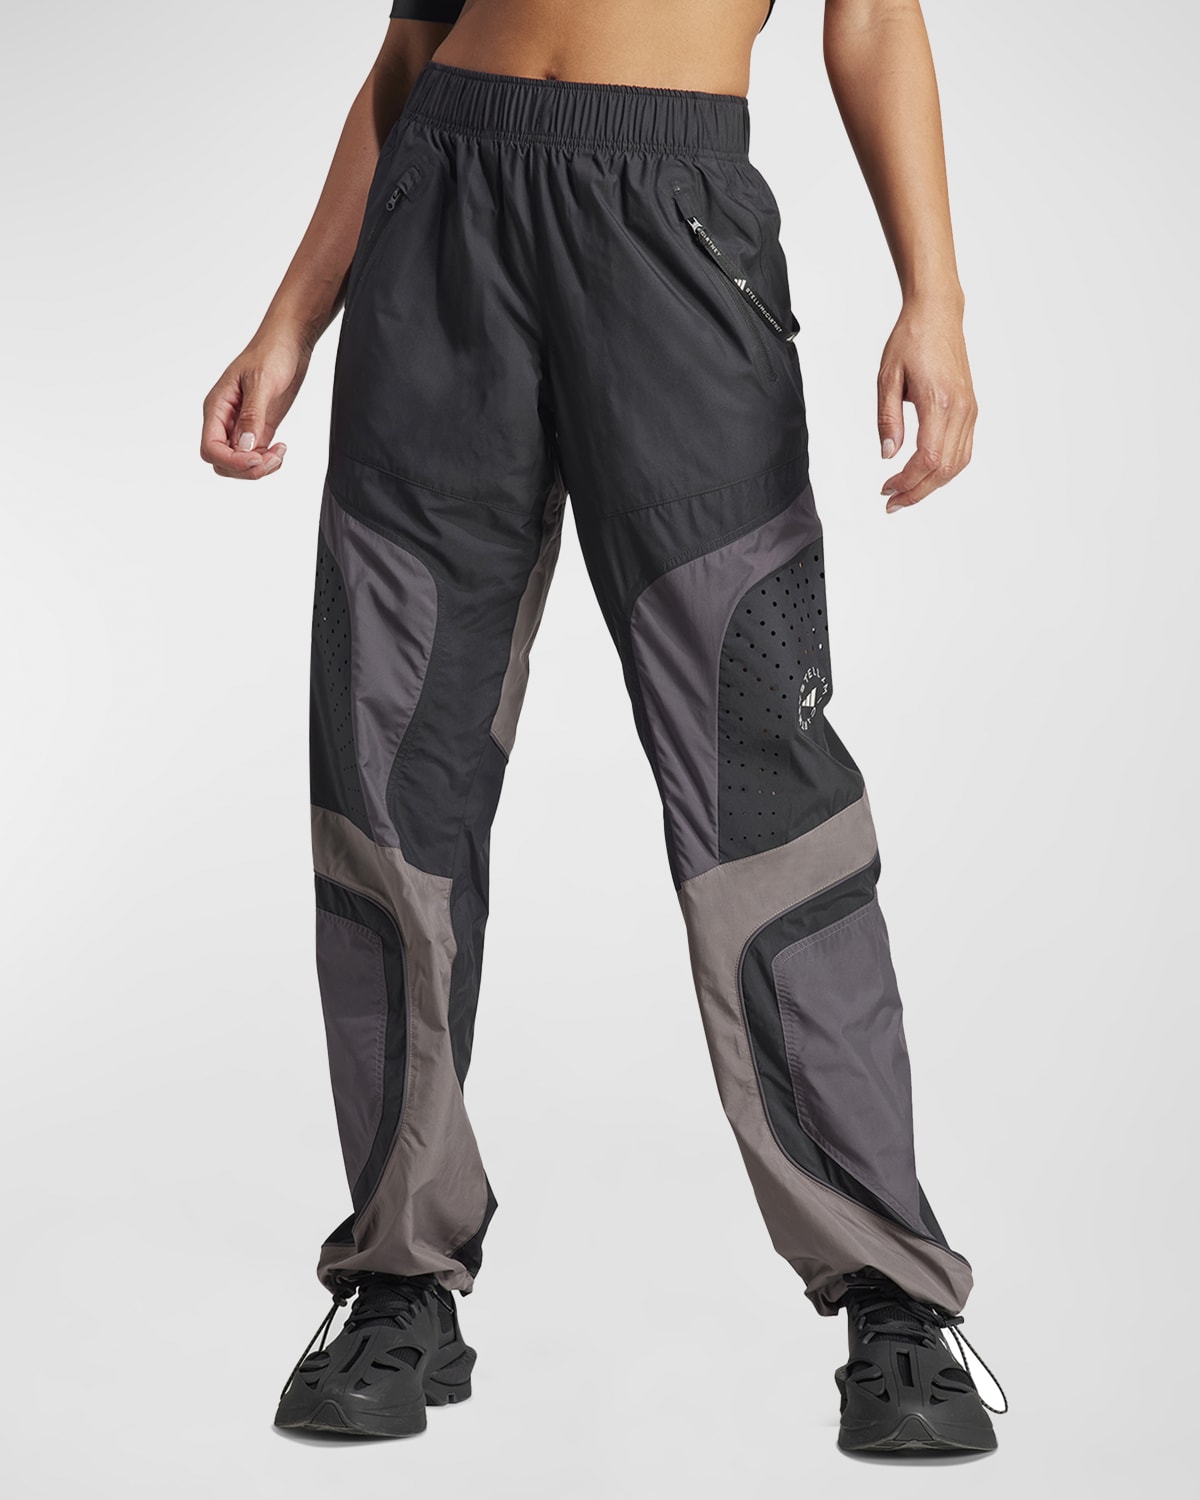 Adidas By Stella Mccartney Woven Track Trousers In Black/utiblk